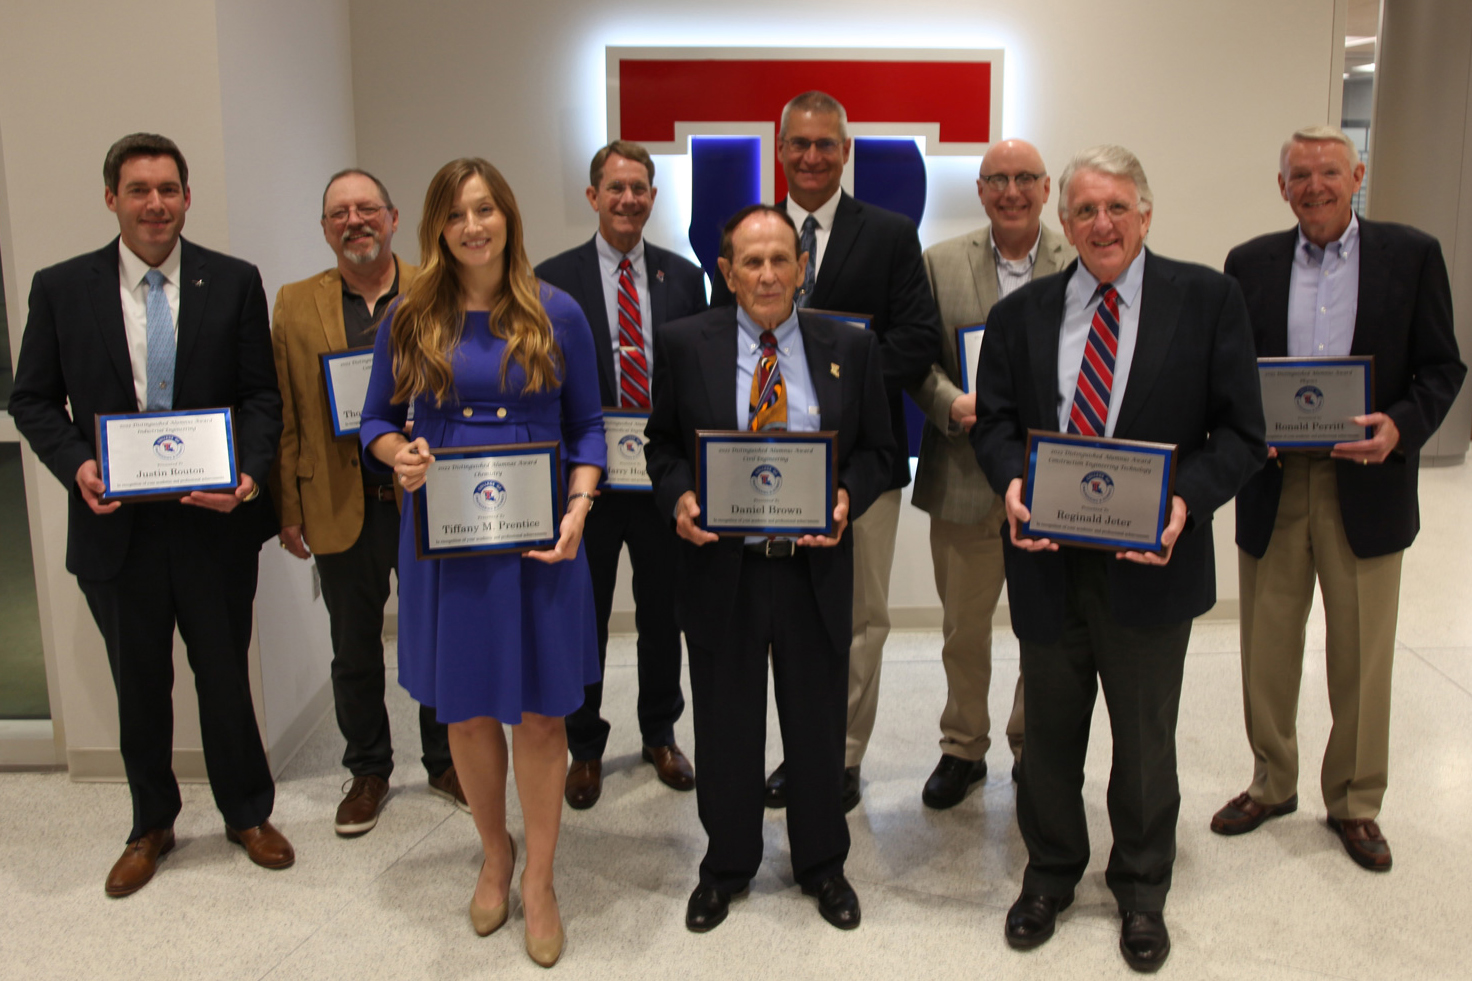 Distinguished Alumni with their plaques